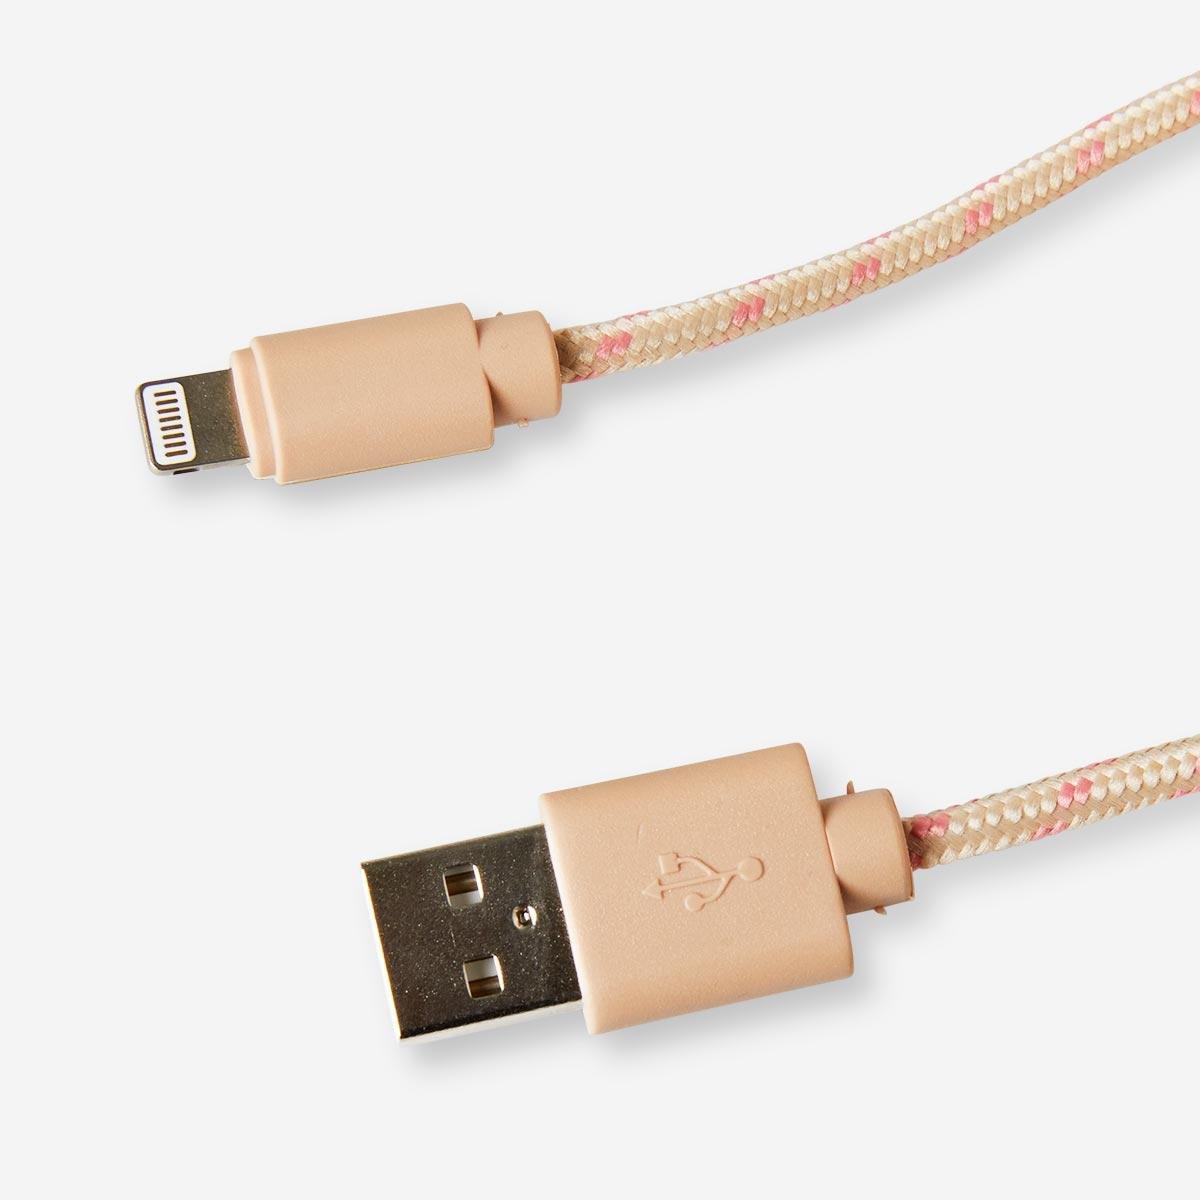 Beige iPhone charging cable.